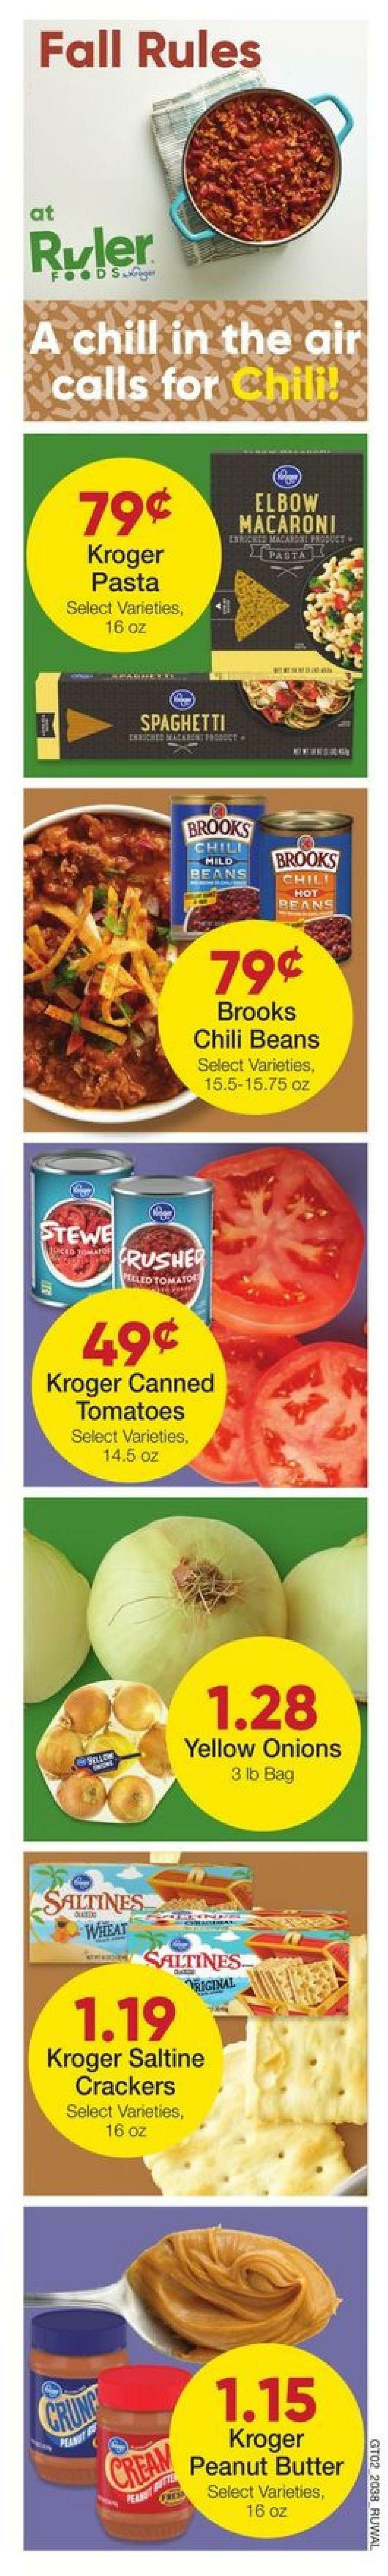 Ruler Foods Weekly Ad from October 21